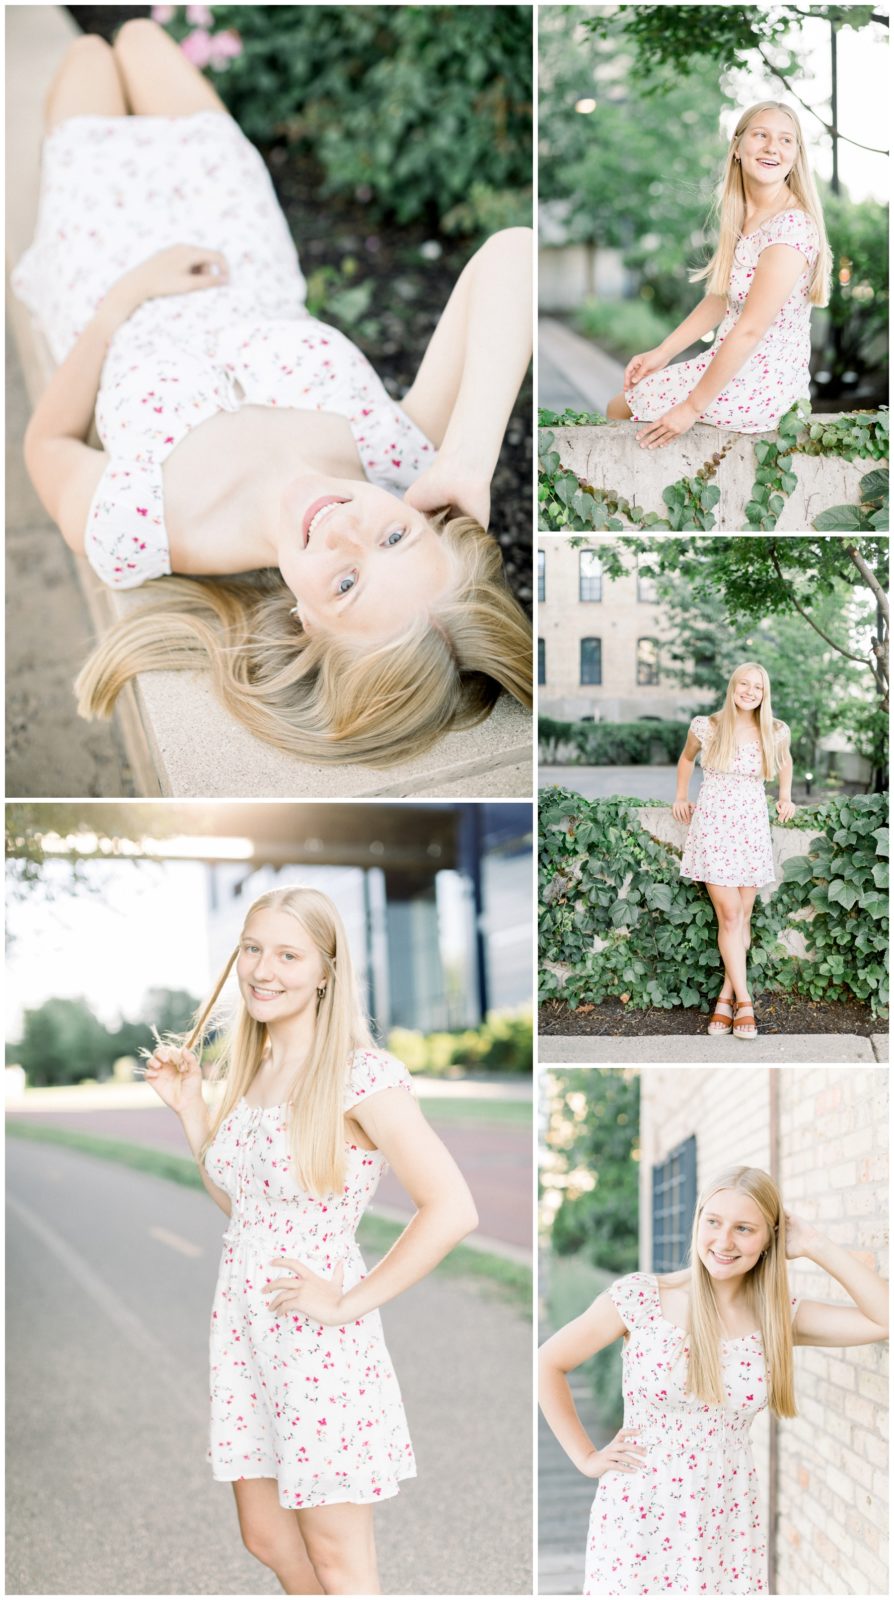 Blonde girl wearing a dress and posing for her senior photos.